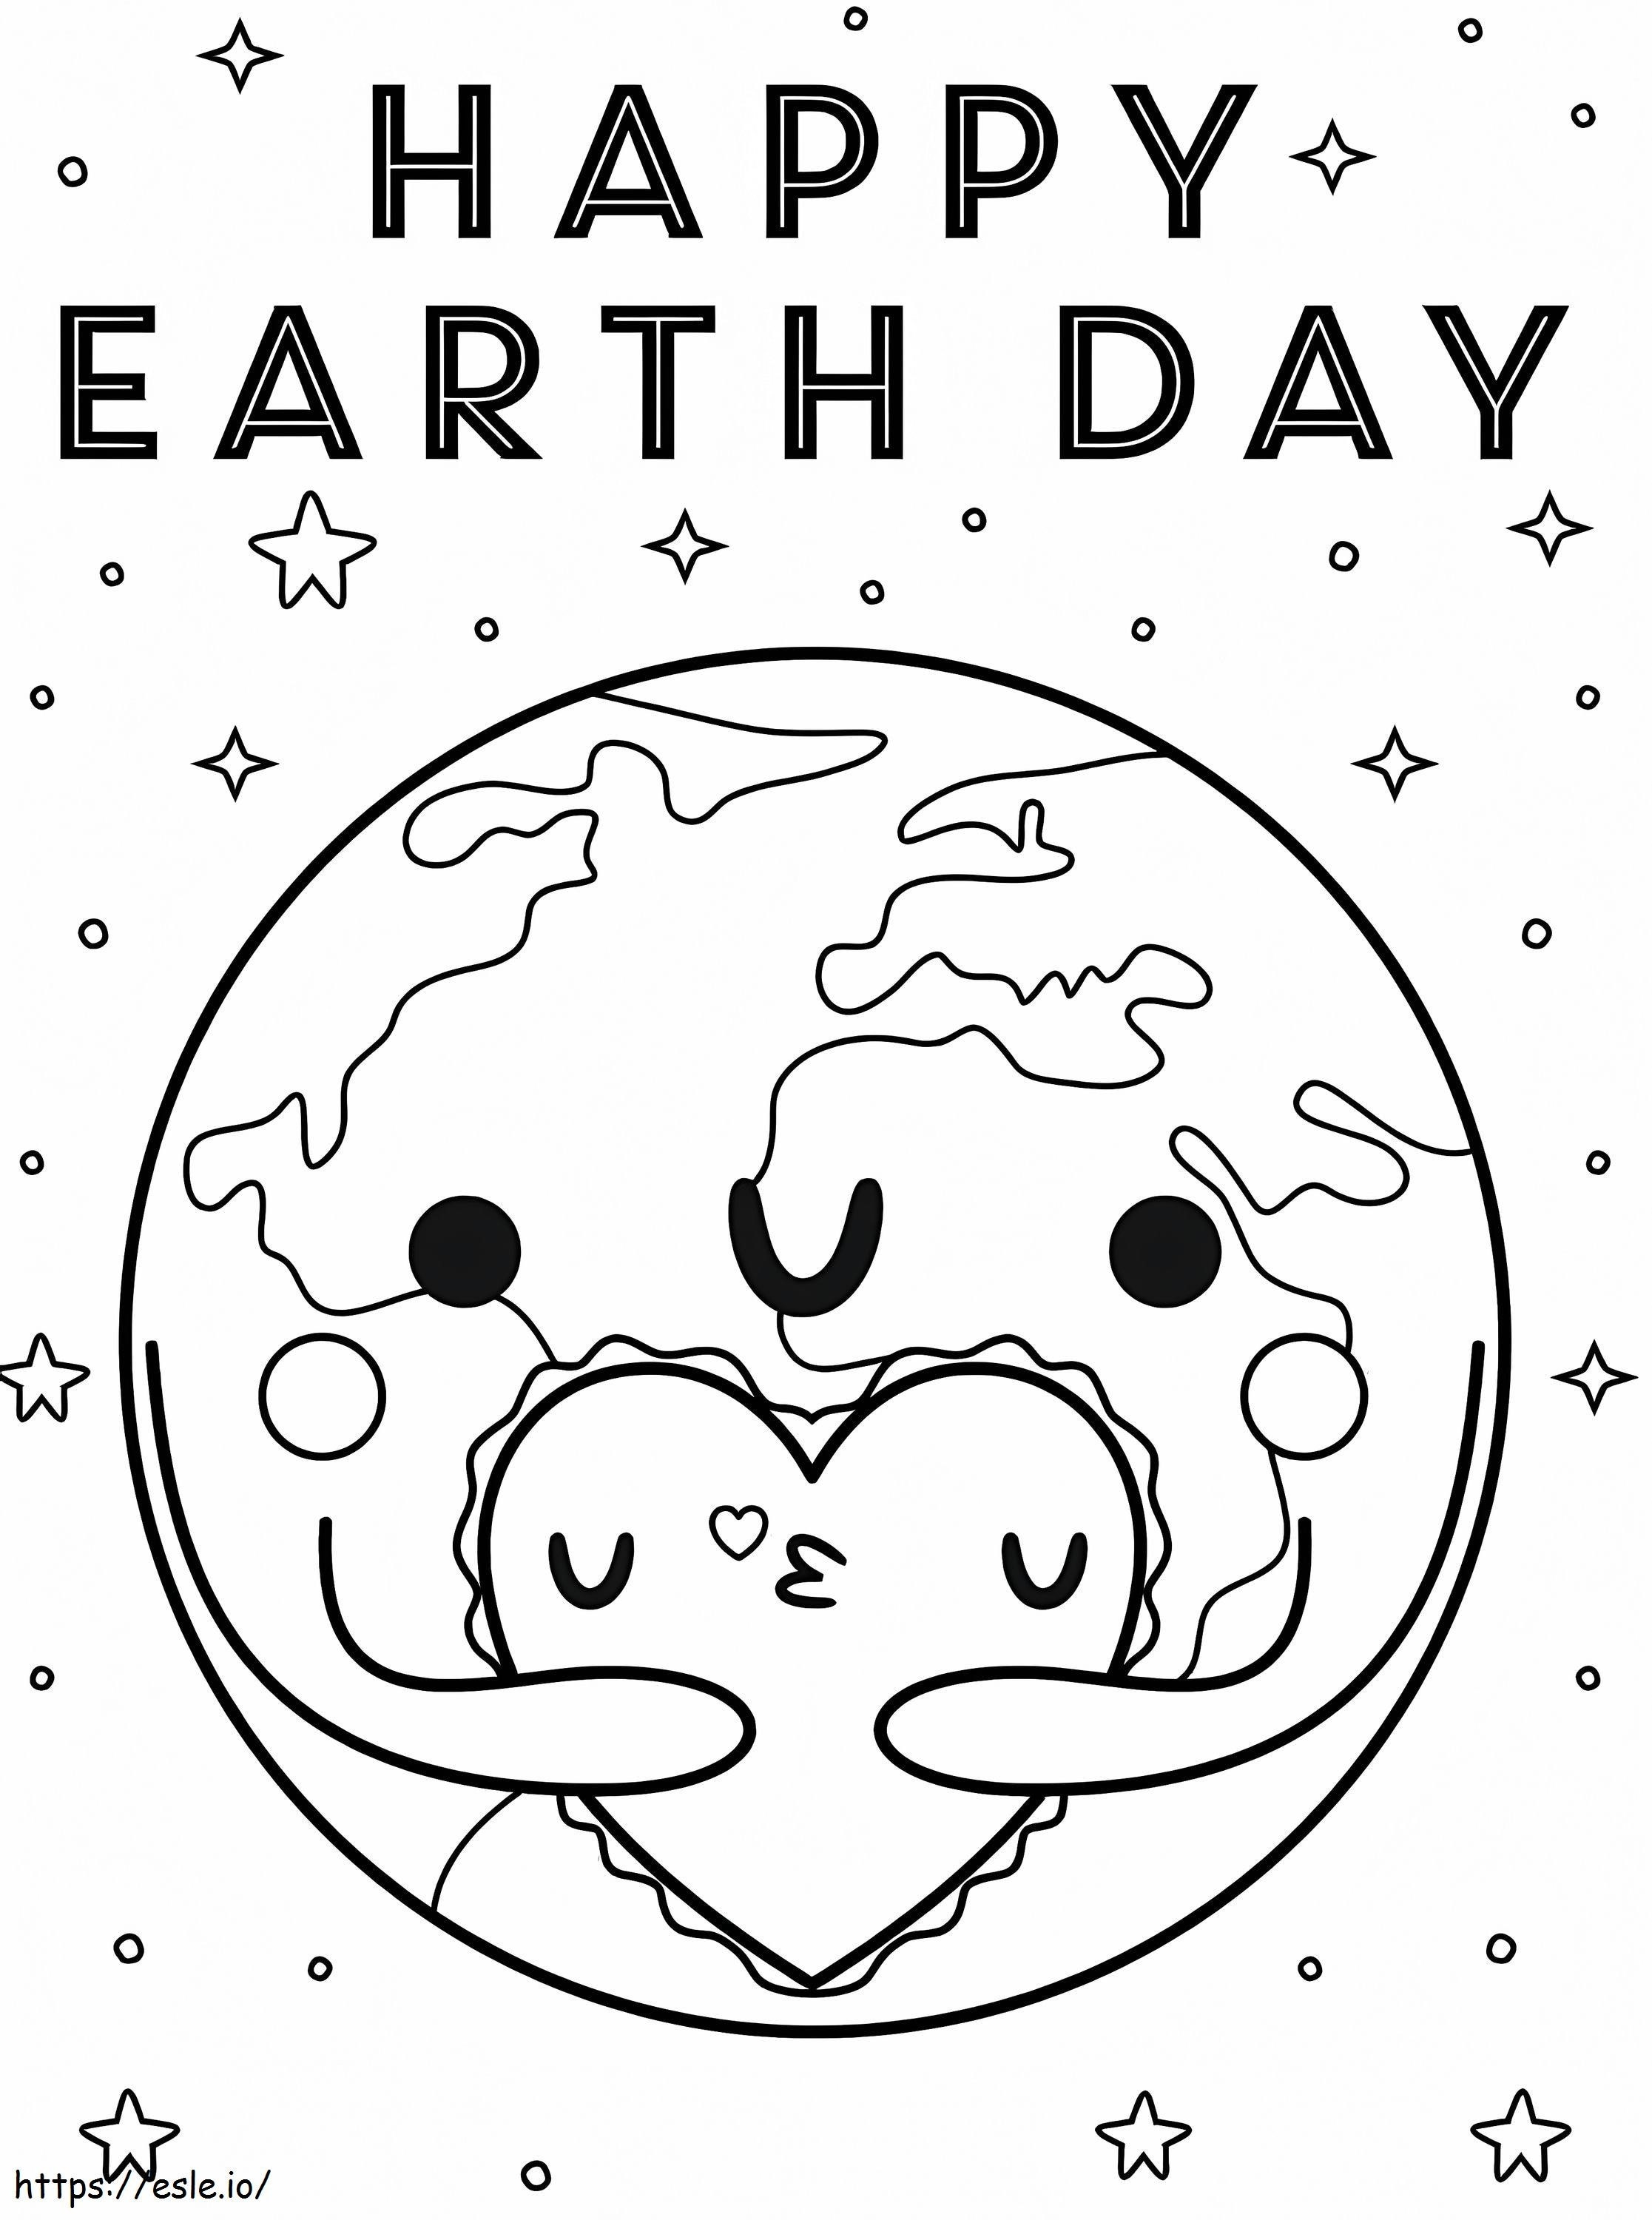 Happy Earth Day 3 coloring page